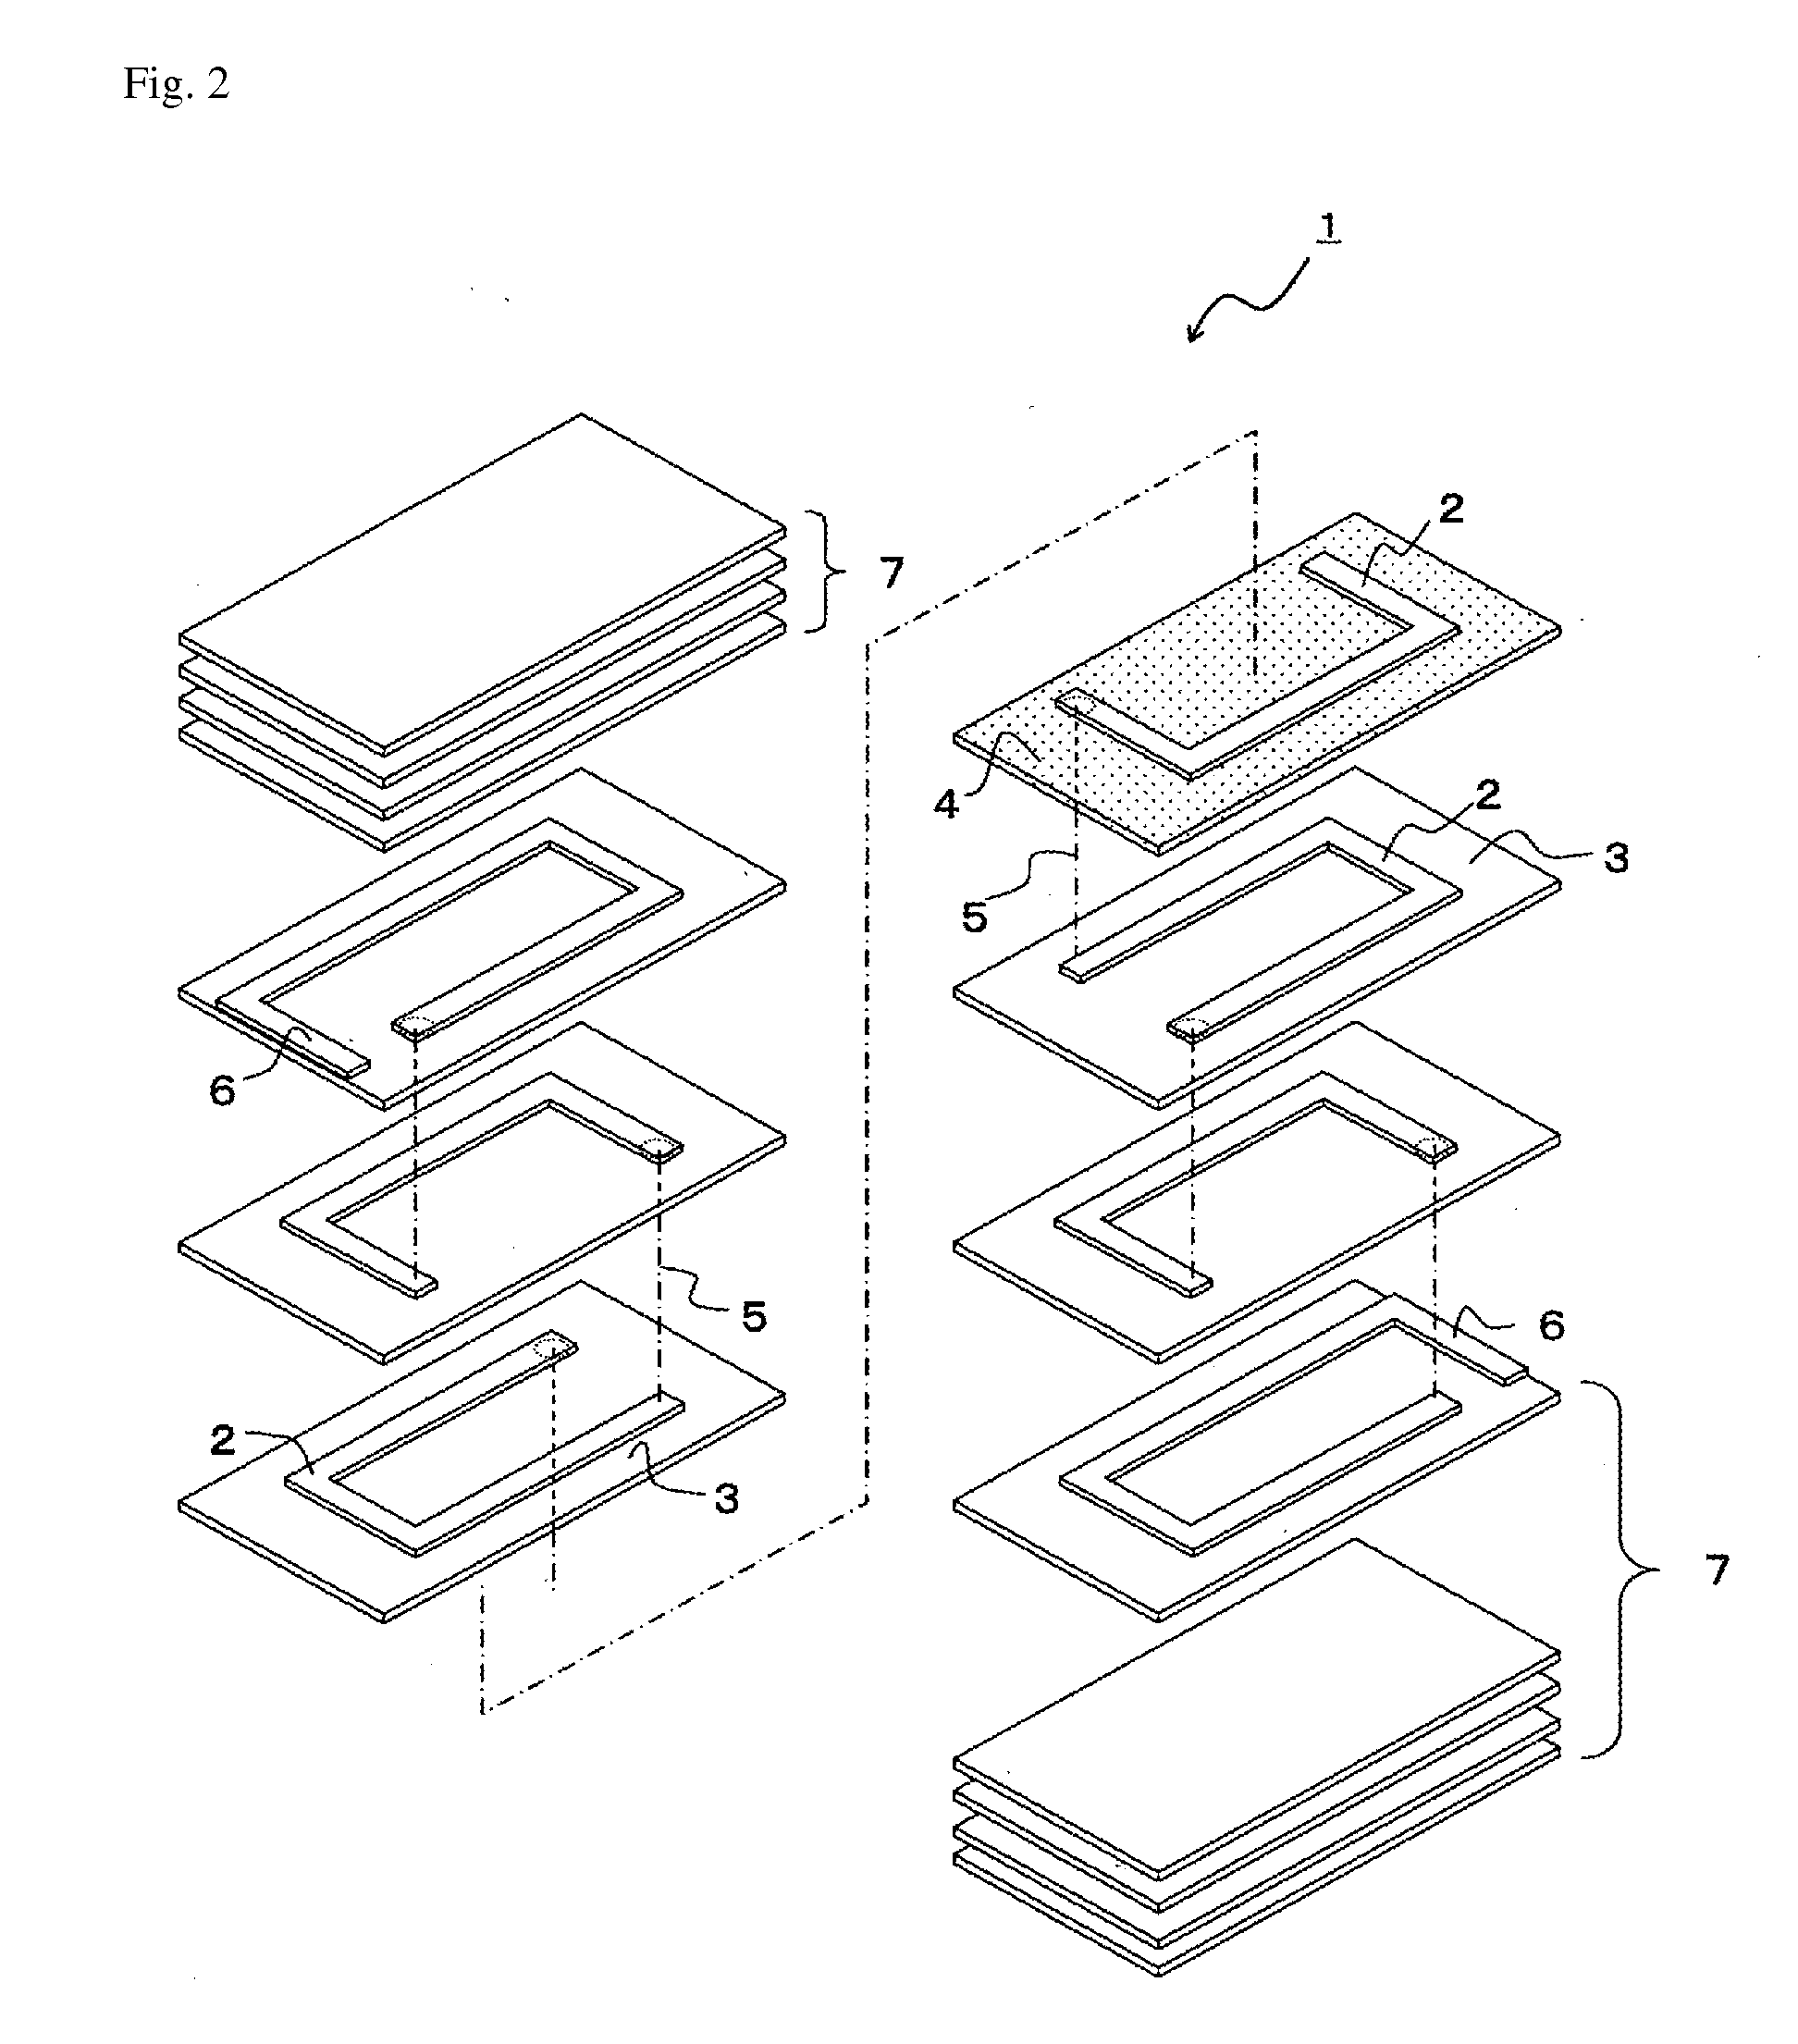 Laminated inductor, method for manufacturing  the laminated inductor, and laminated choke coil